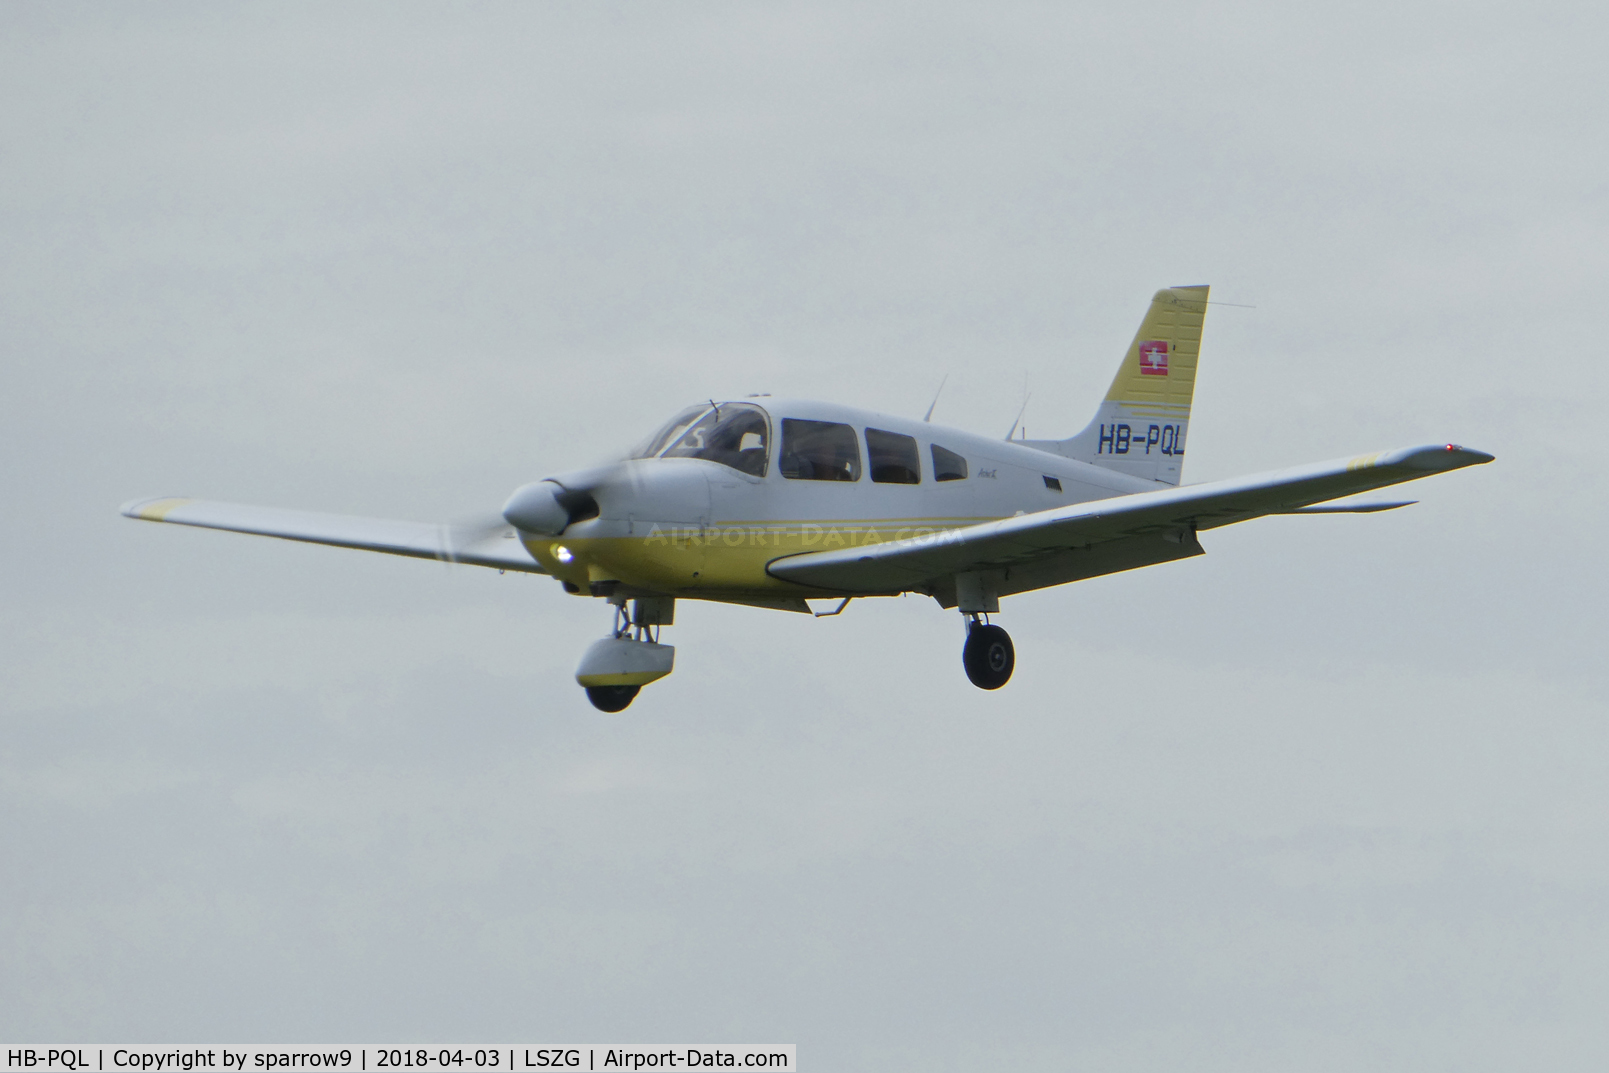 HB-PQL, 1989 Piper PA-28-181 Archer II C/N 2890121, Landing at Grenchen. HB-registered since 2001-09-06.